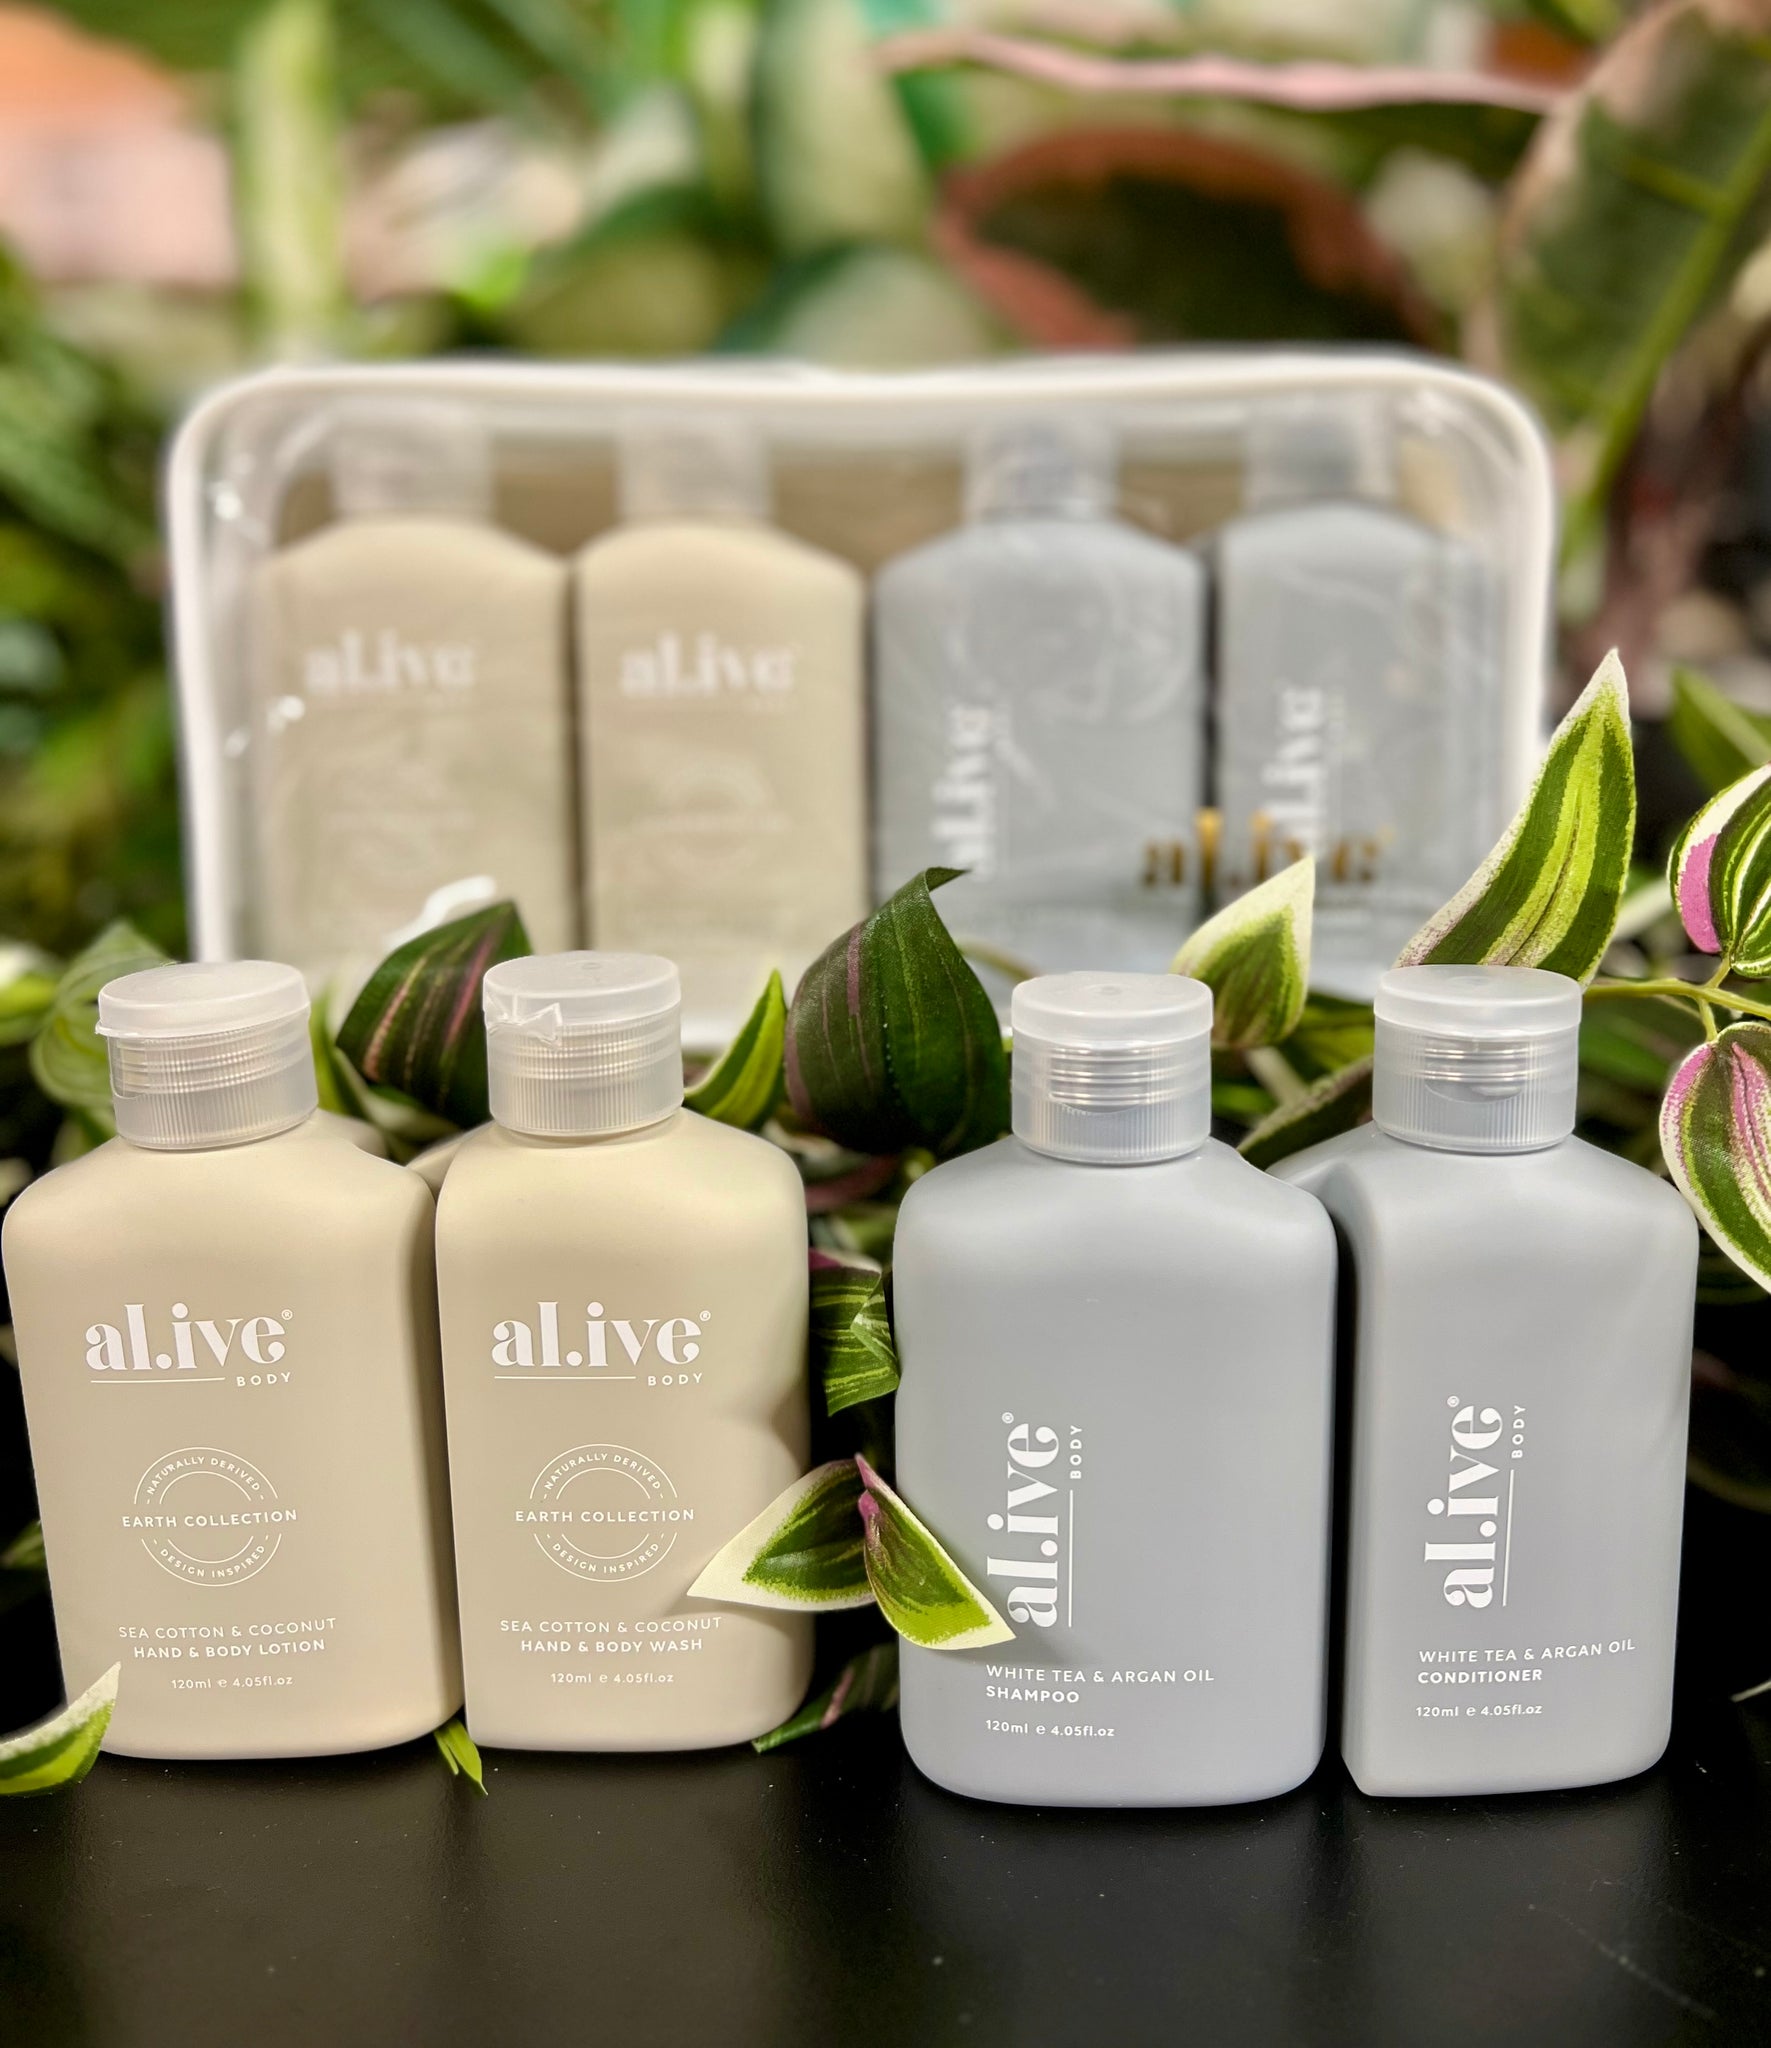 AL.IVE - HAIR AND BODY TRAVEL PACK